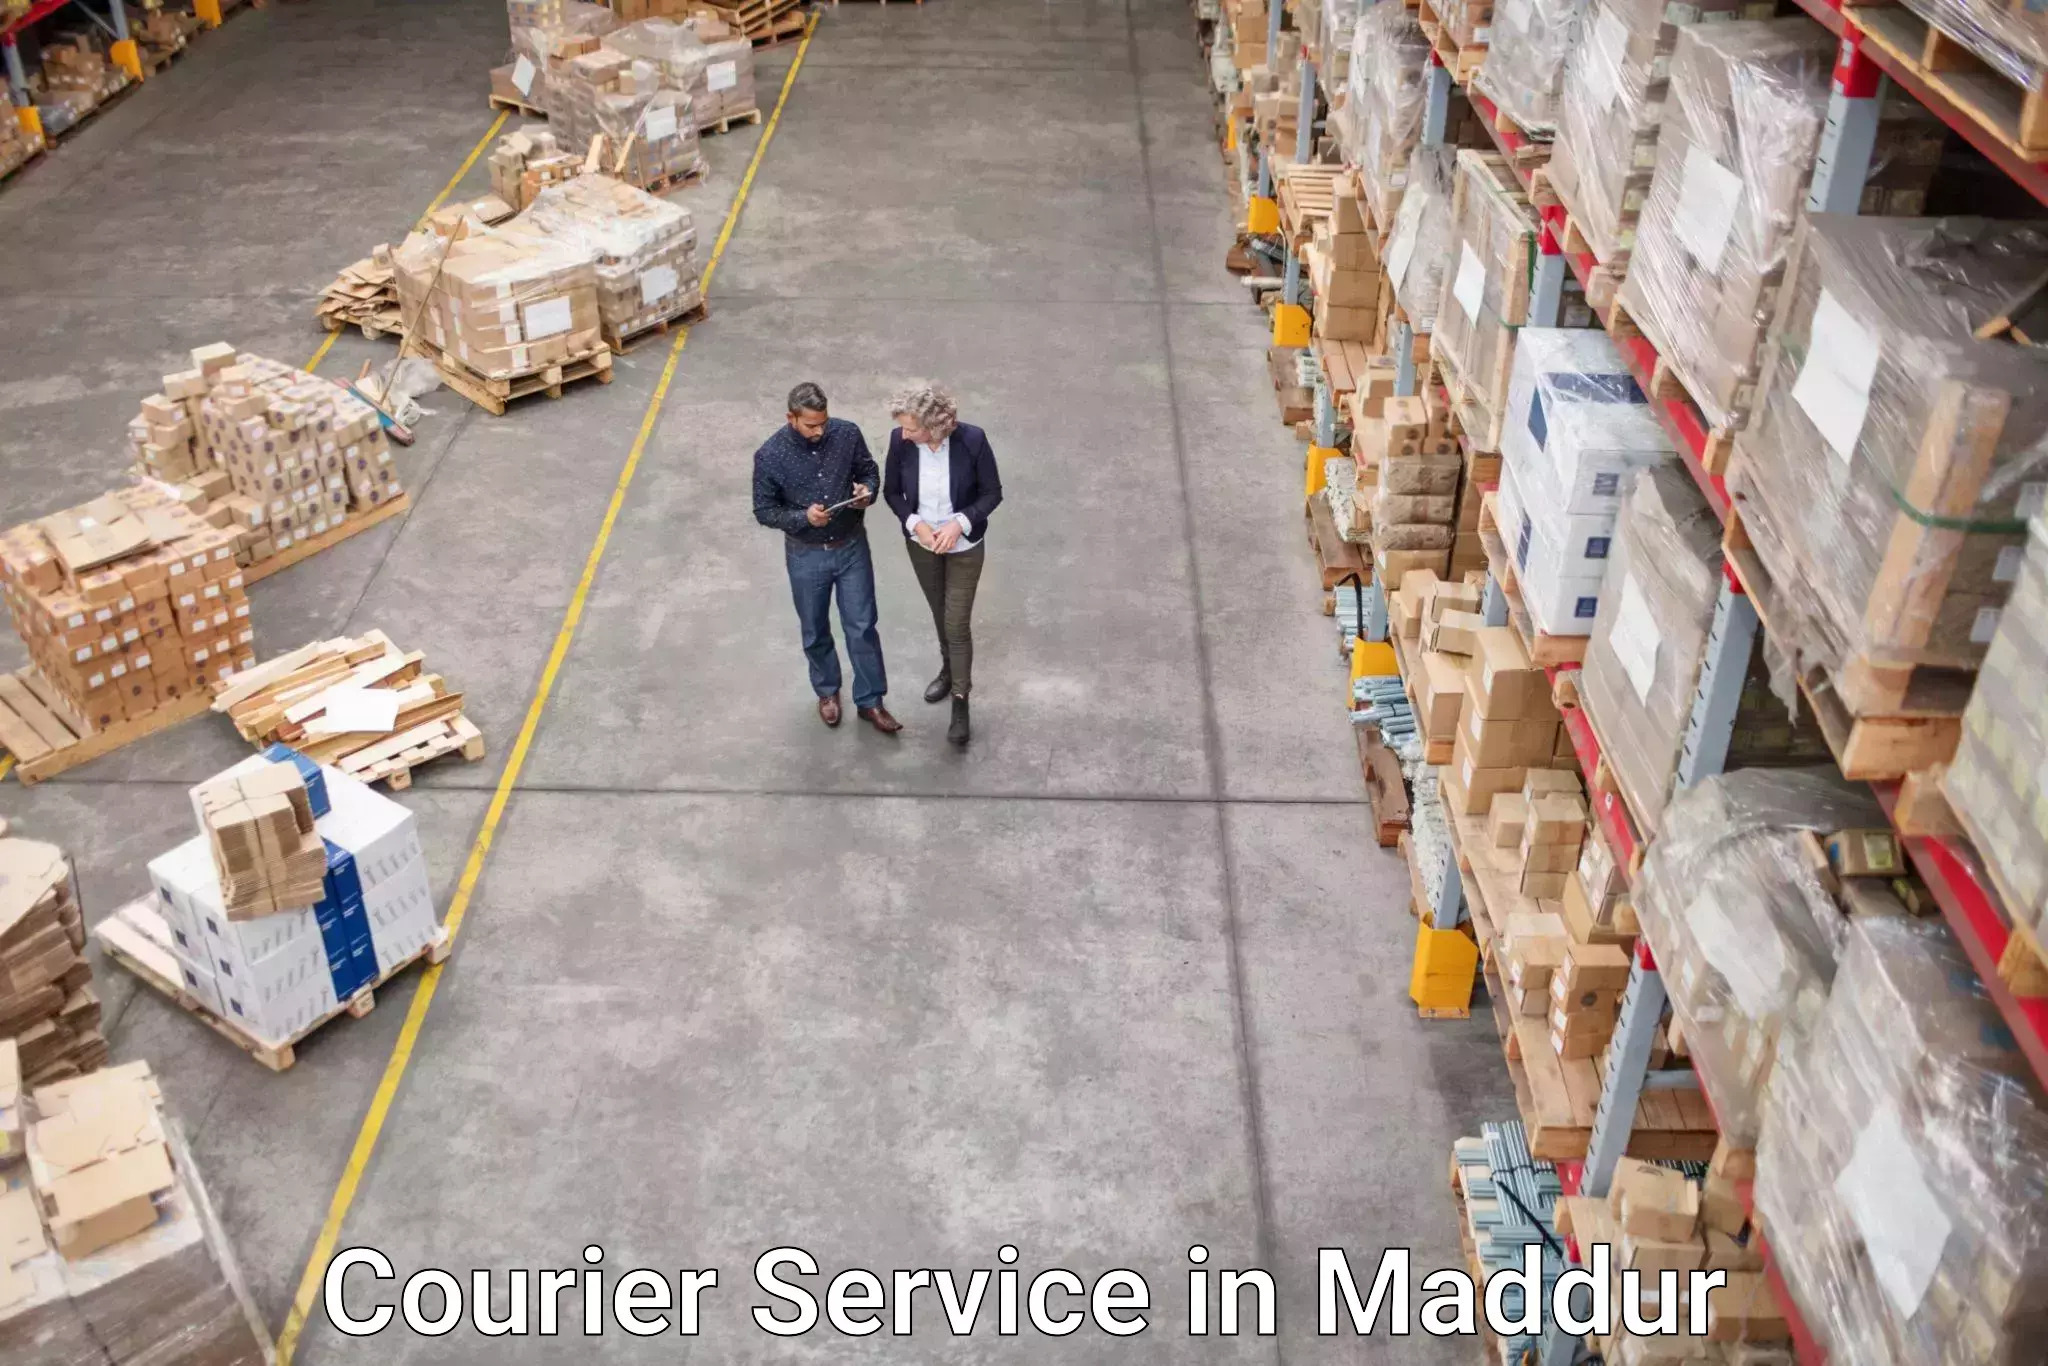 Advanced parcel tracking in Maddur